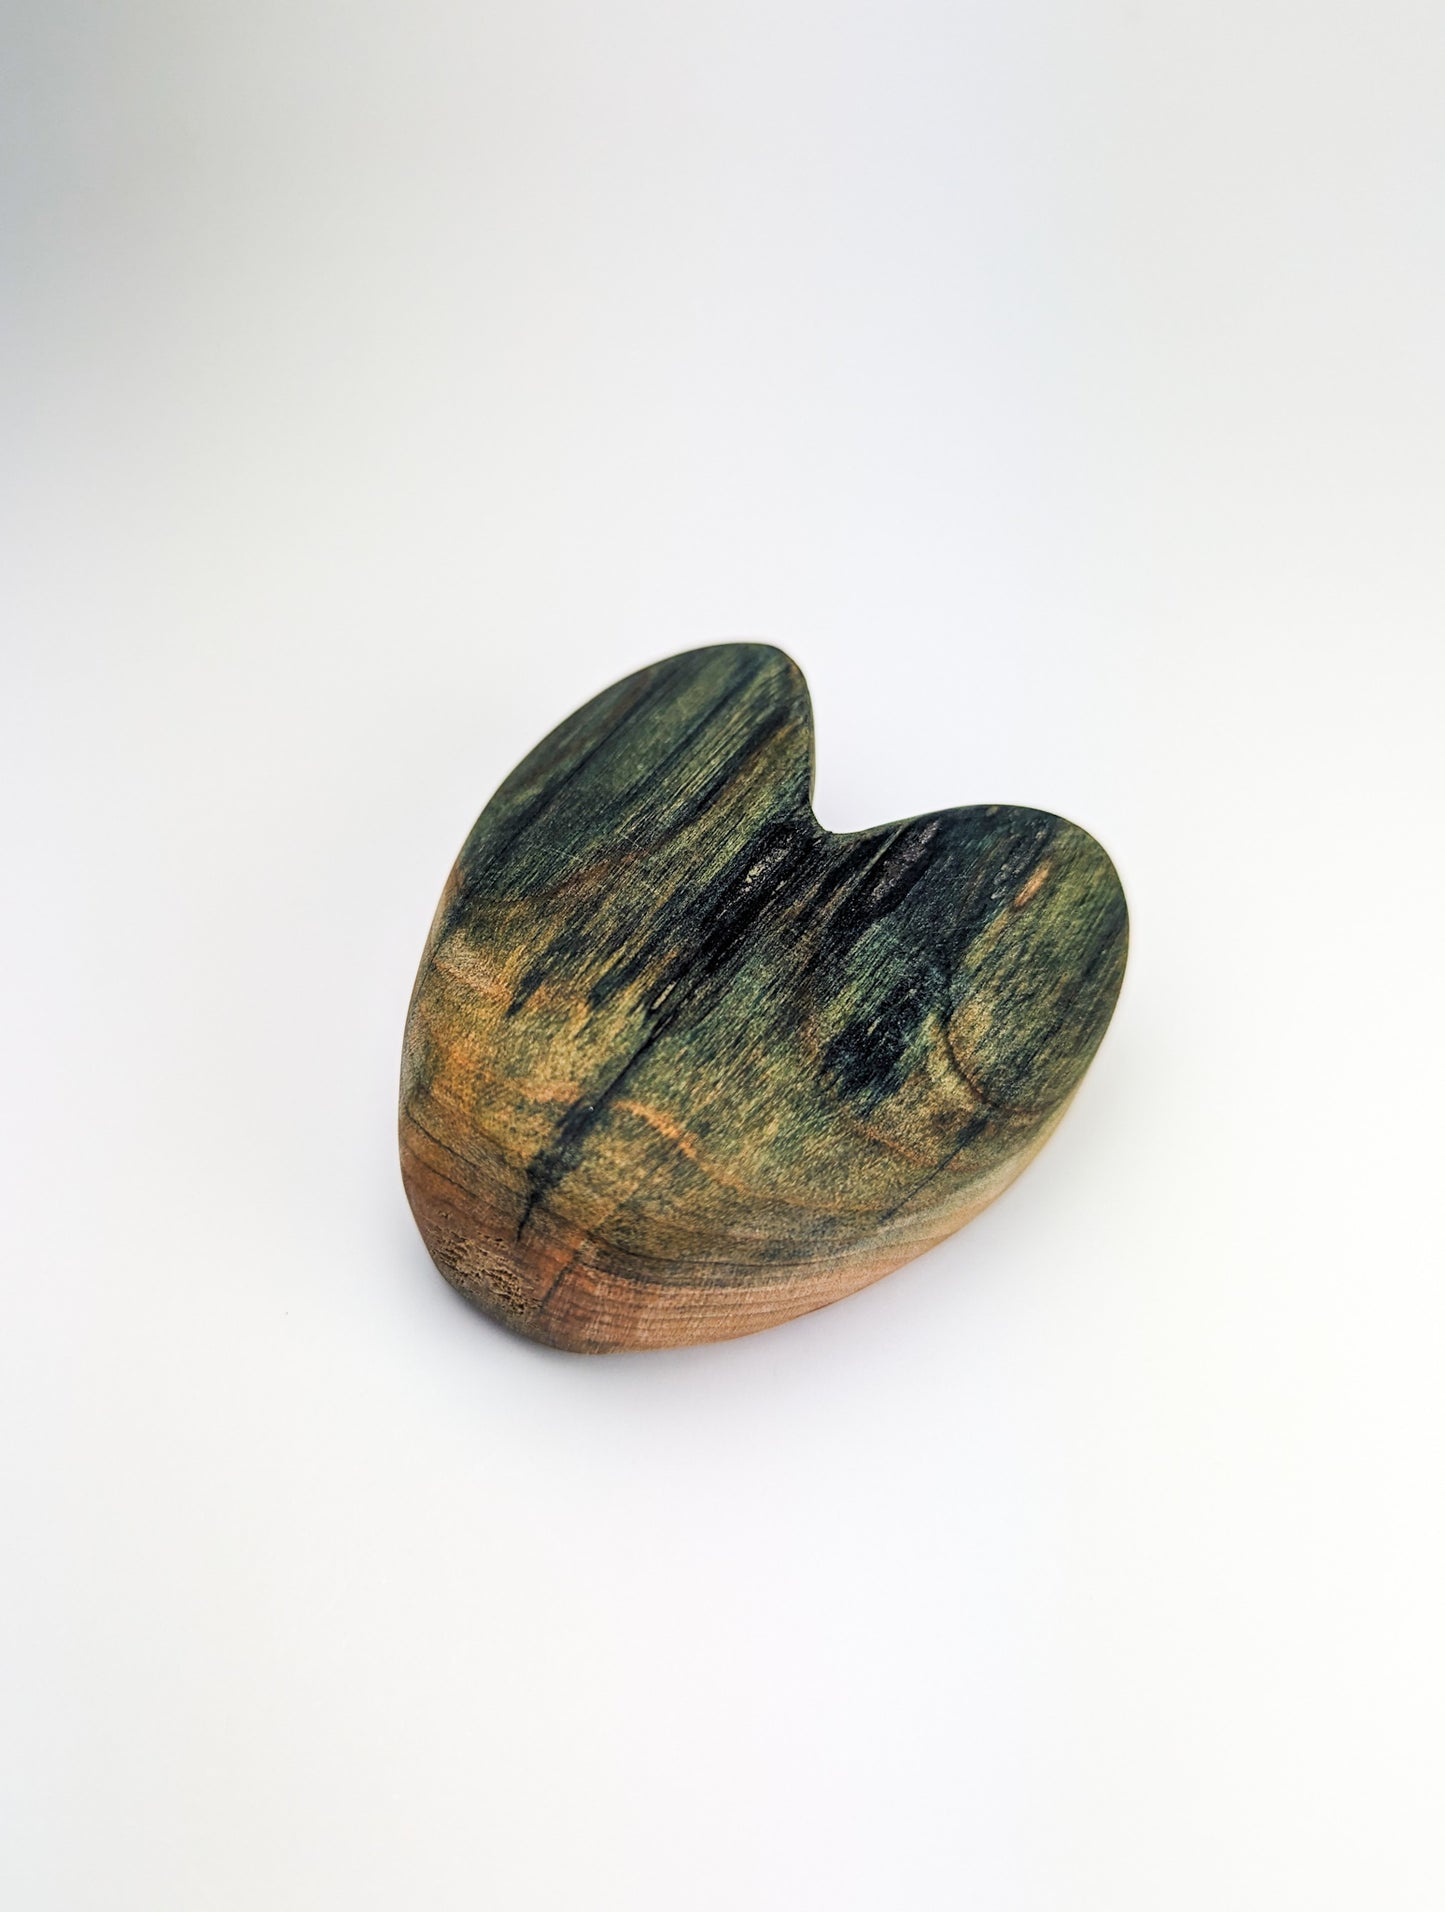 Large Heart | Chlorociboria Creation | Crafted from Mushroom-Colored Wood